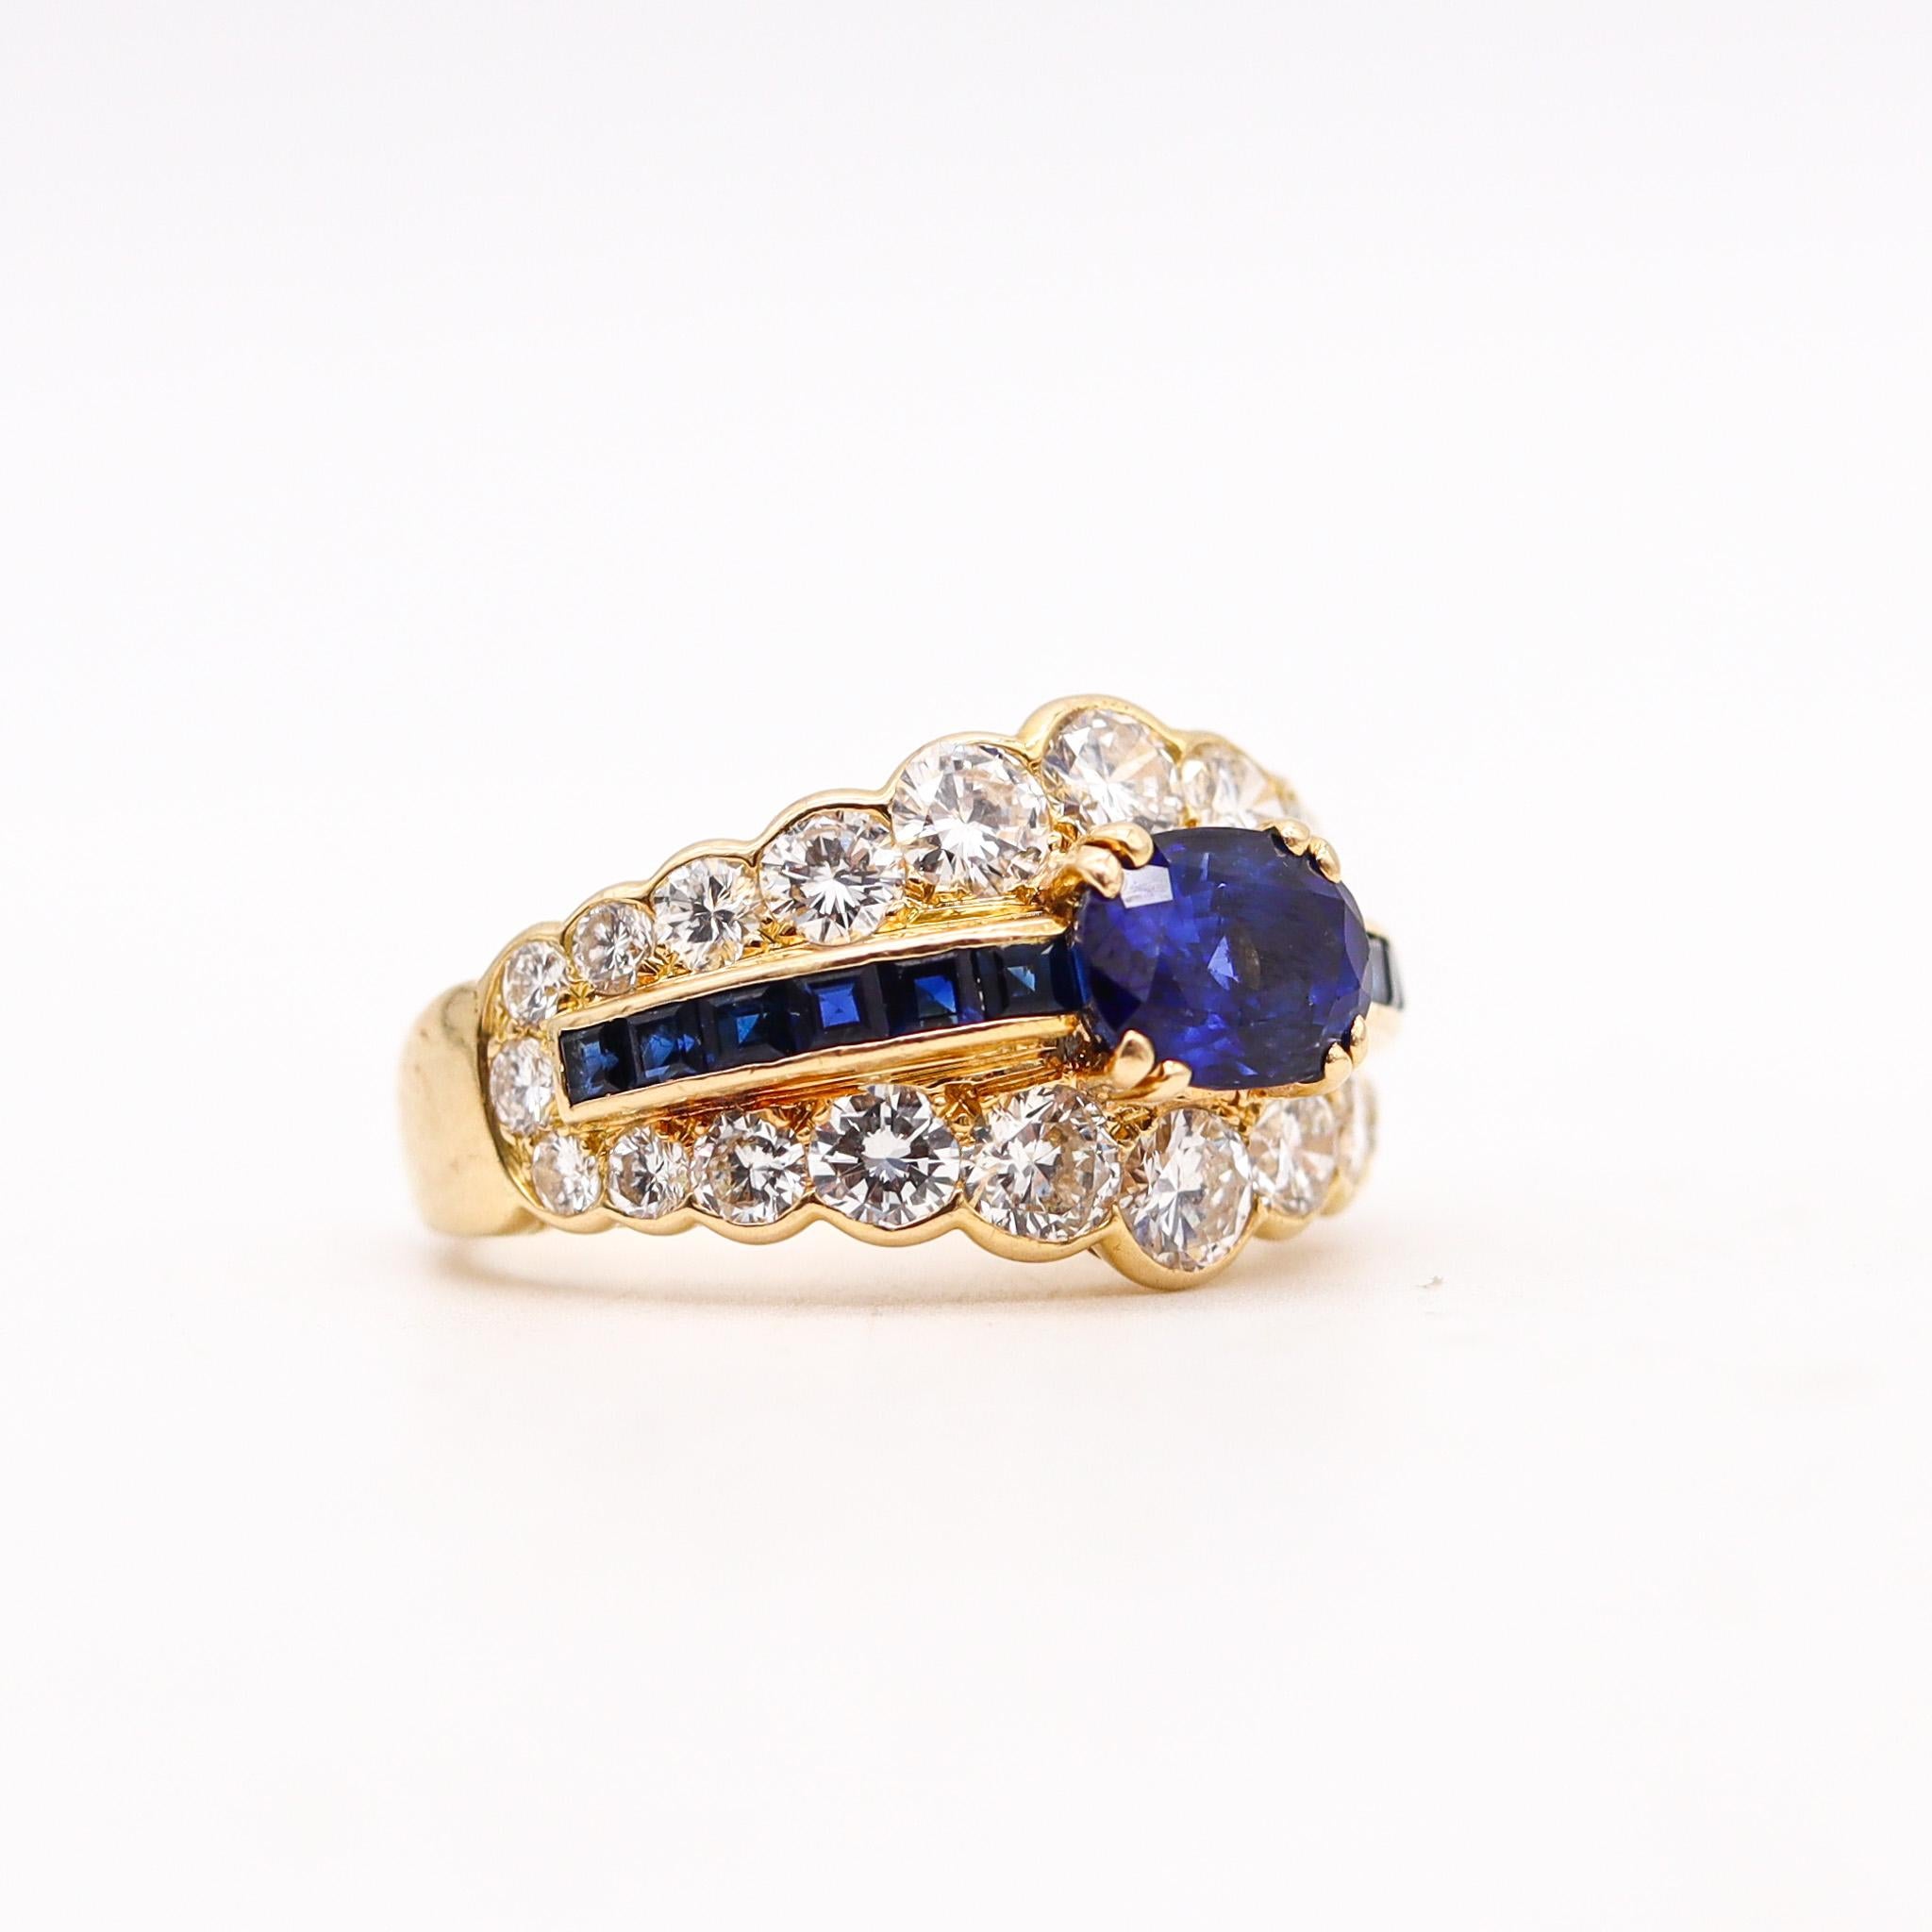 Modernist Andre Vassort 1970 Ring In 18Kt Gold With 4.86 Ctw In Diamonds And Sapphires For Sale